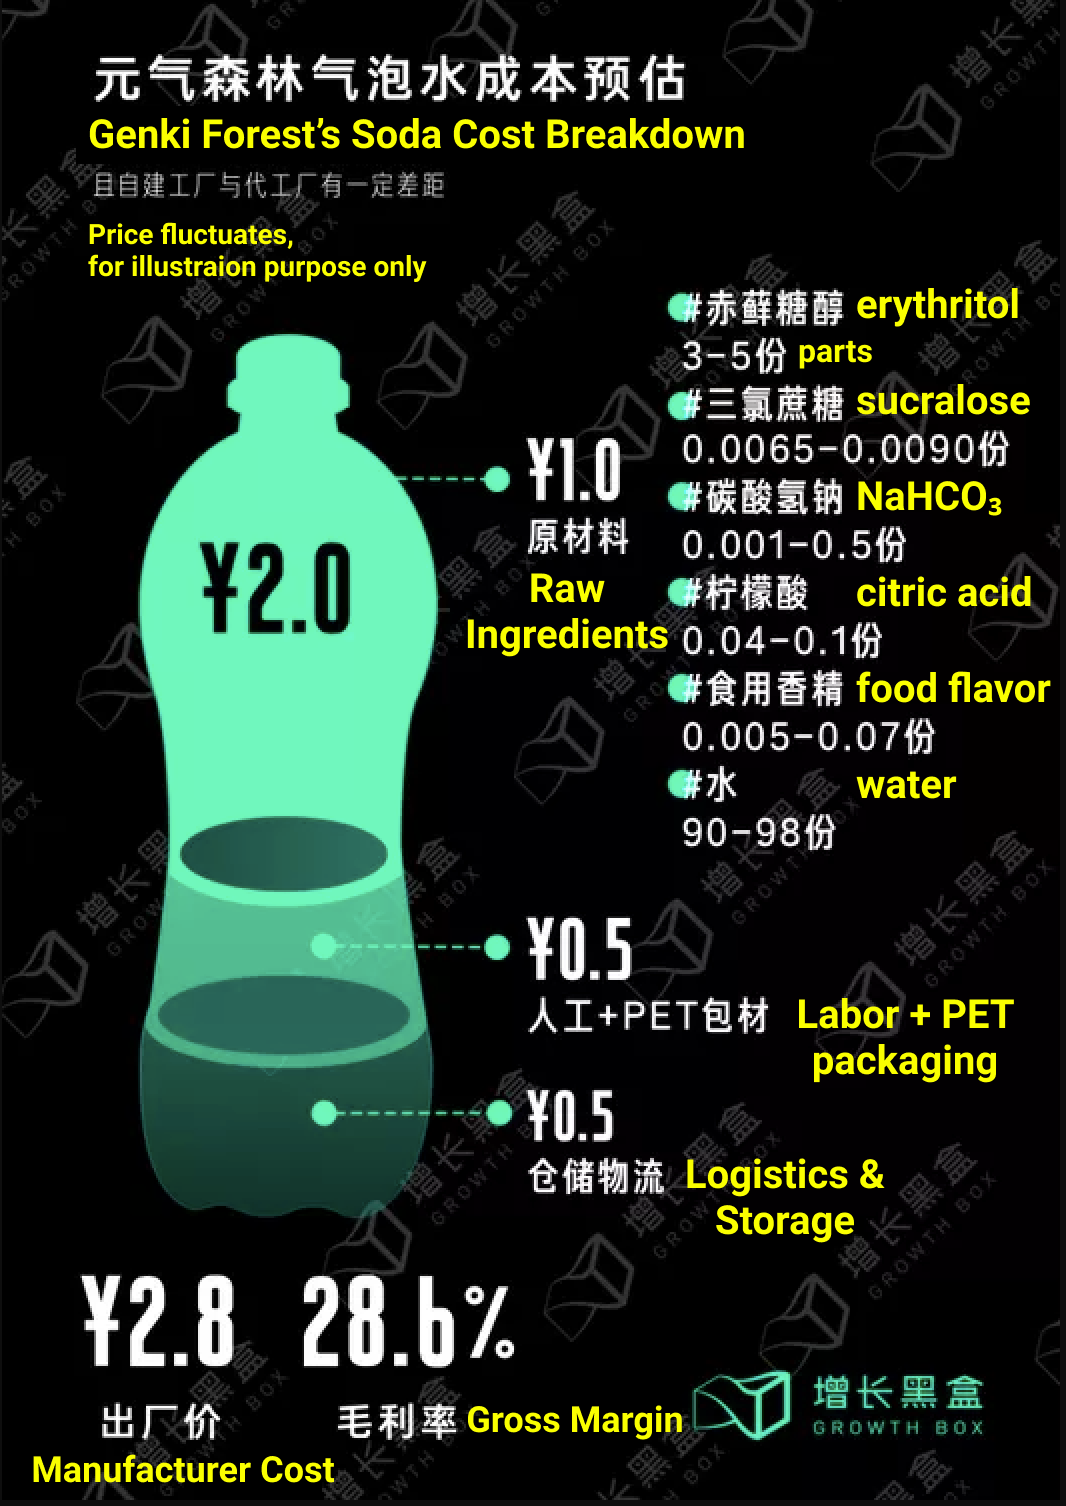 Manufacturing Costs Breakdown for A Genki Forest Soda